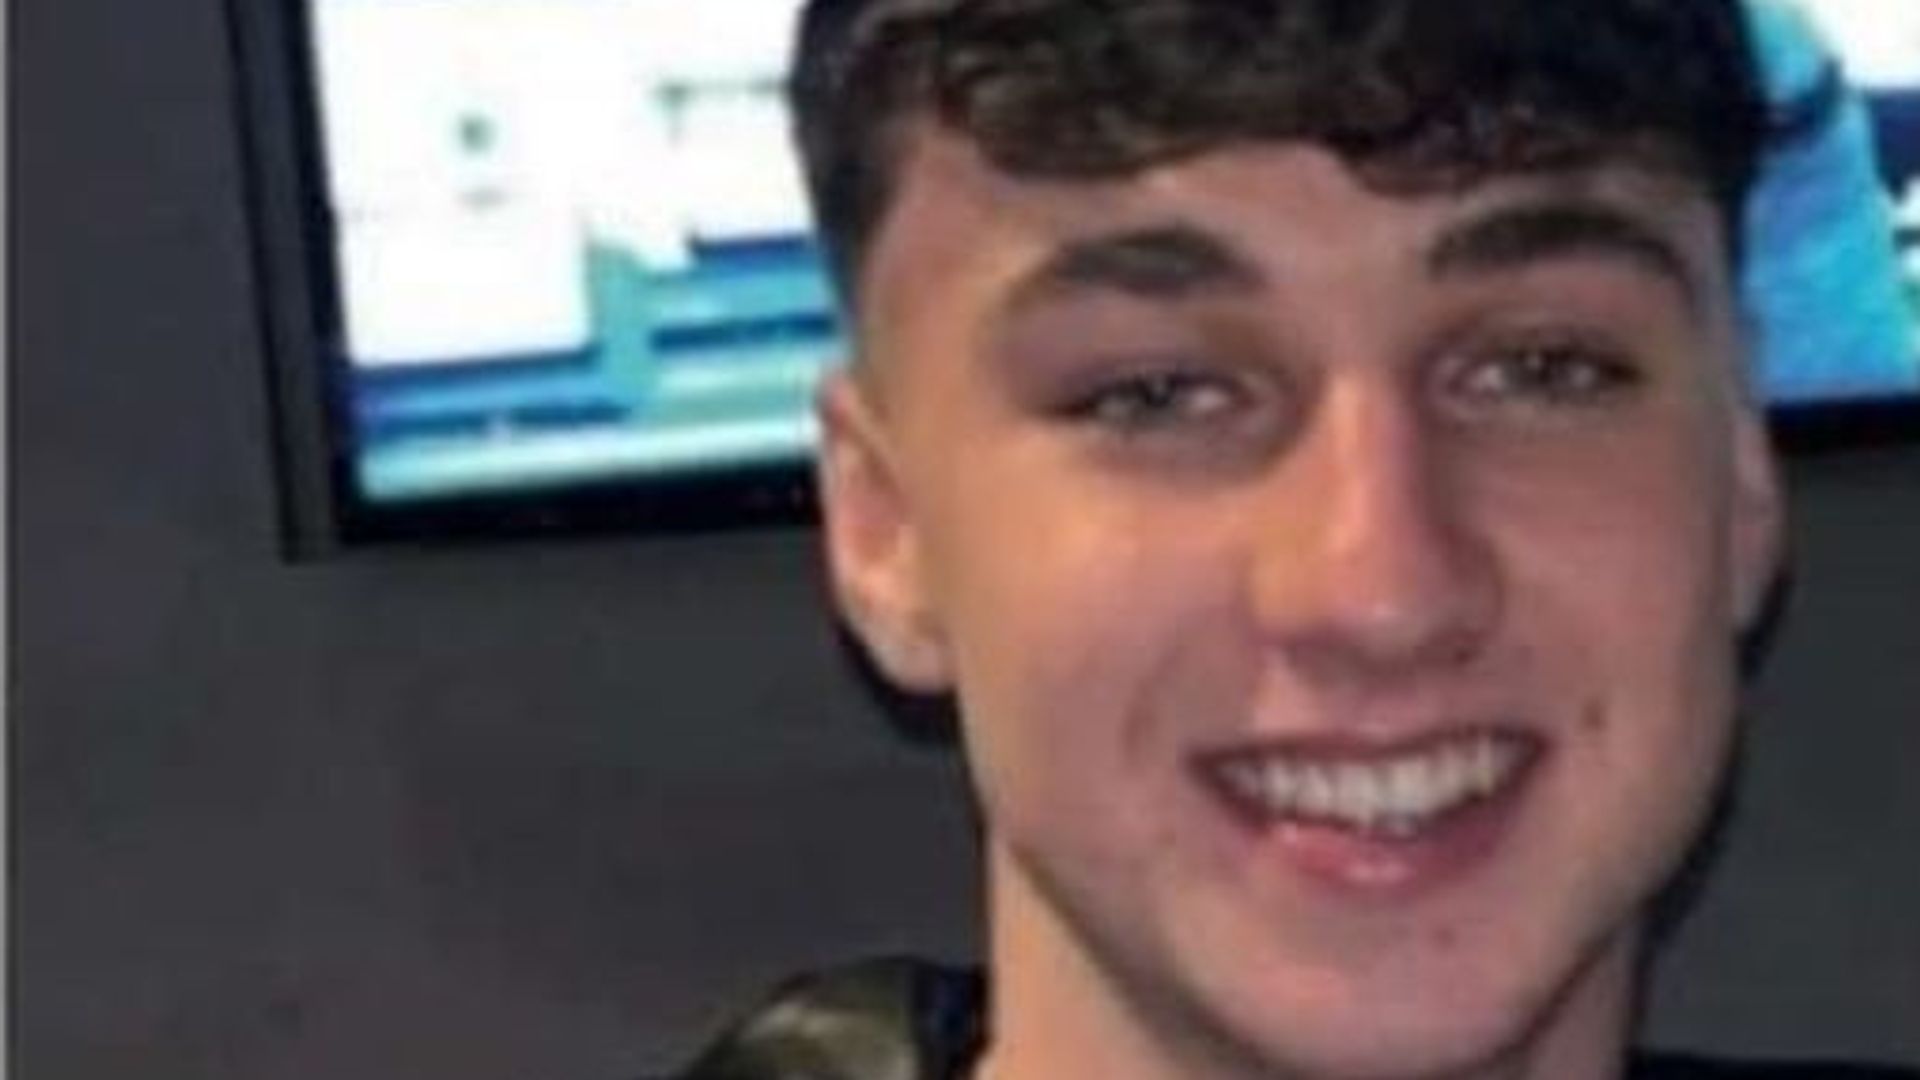 Search for missing British teenager in Tenerife